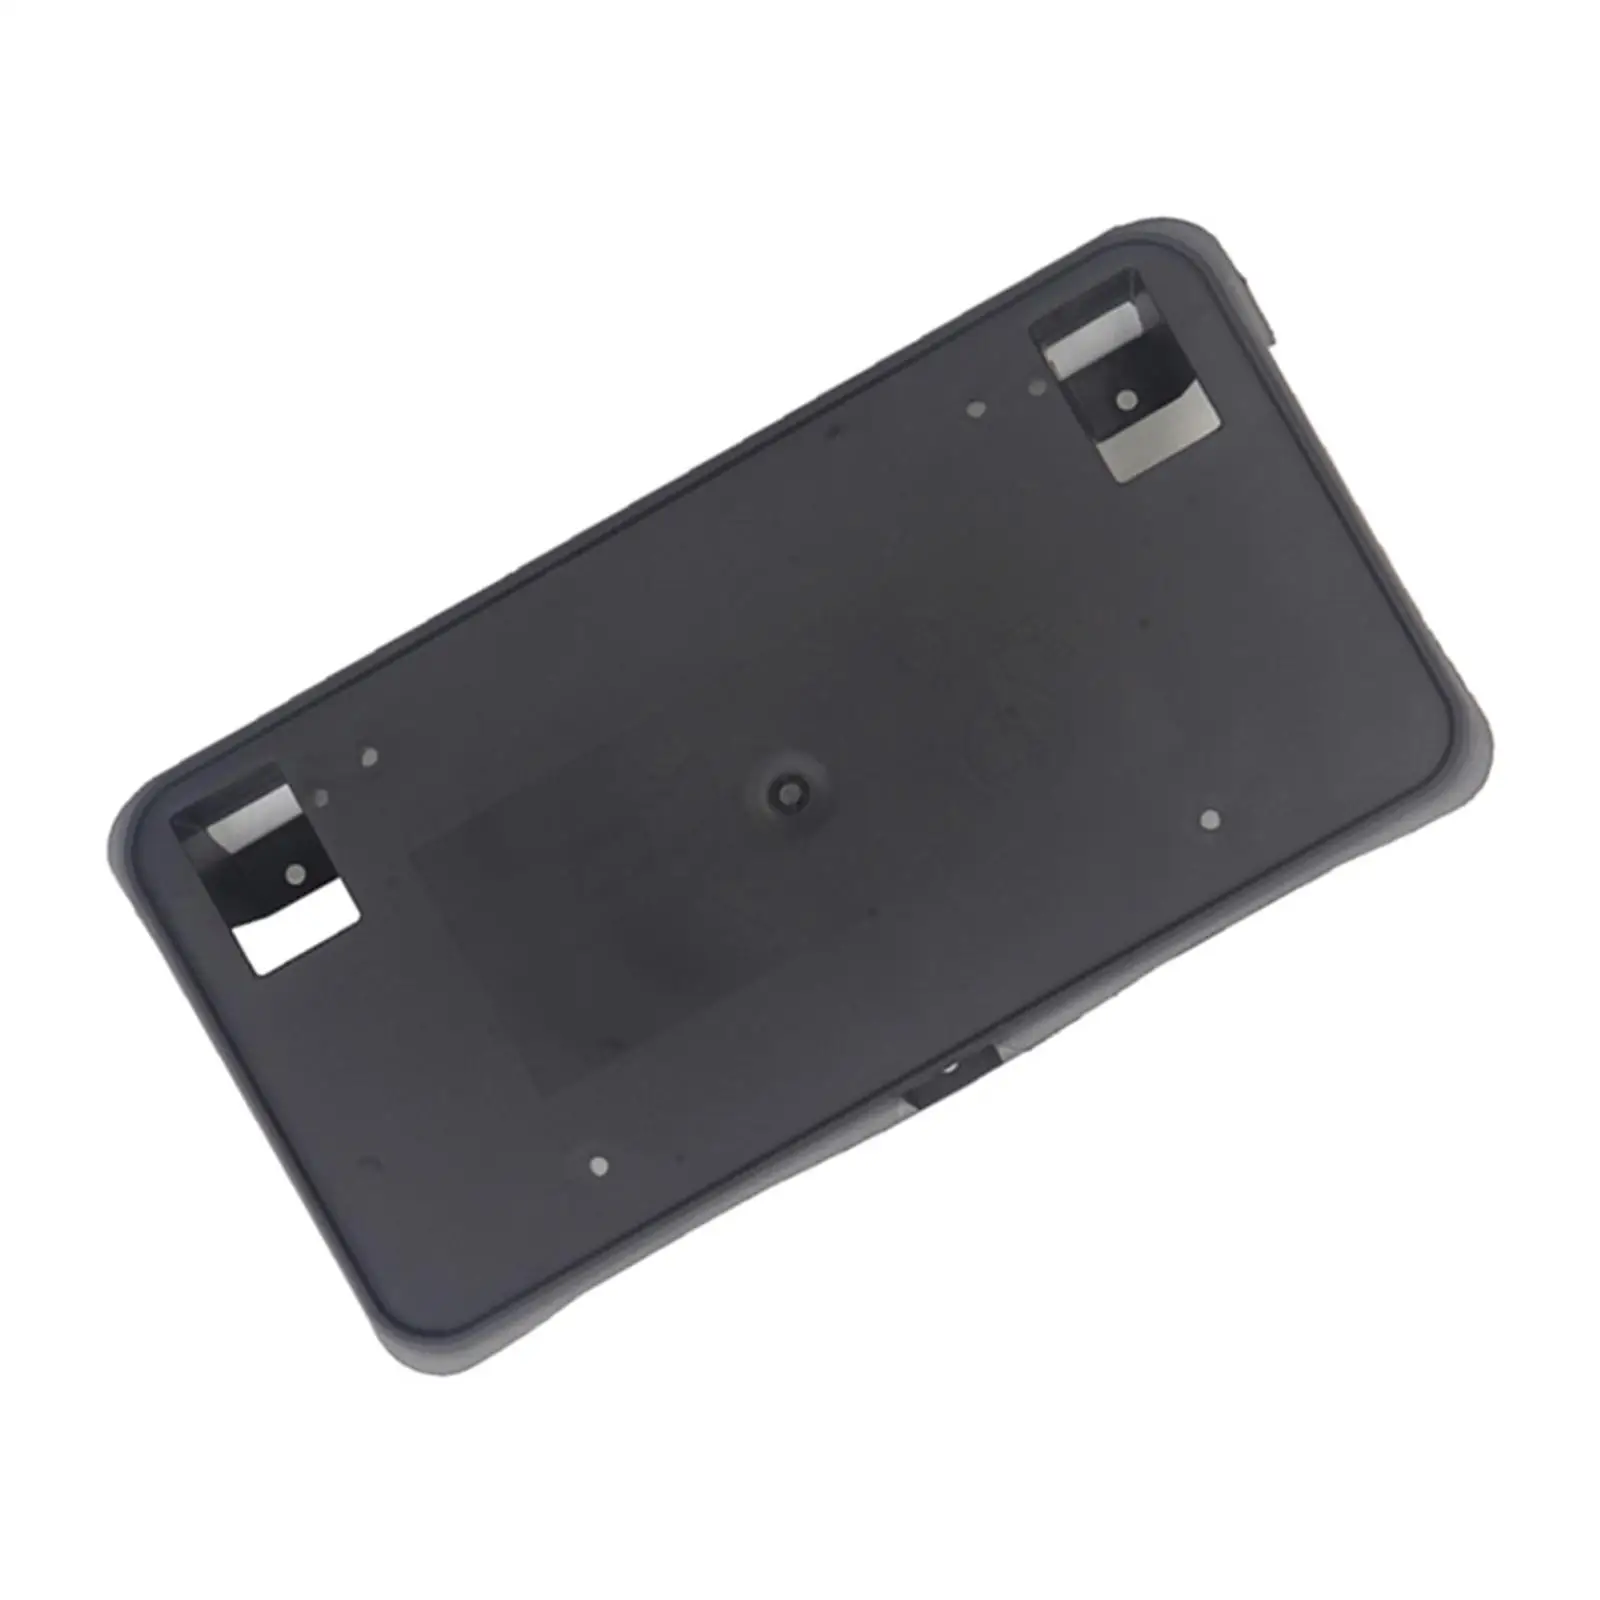 Bumper License  Bracket Holder Fits for Direct Replaces